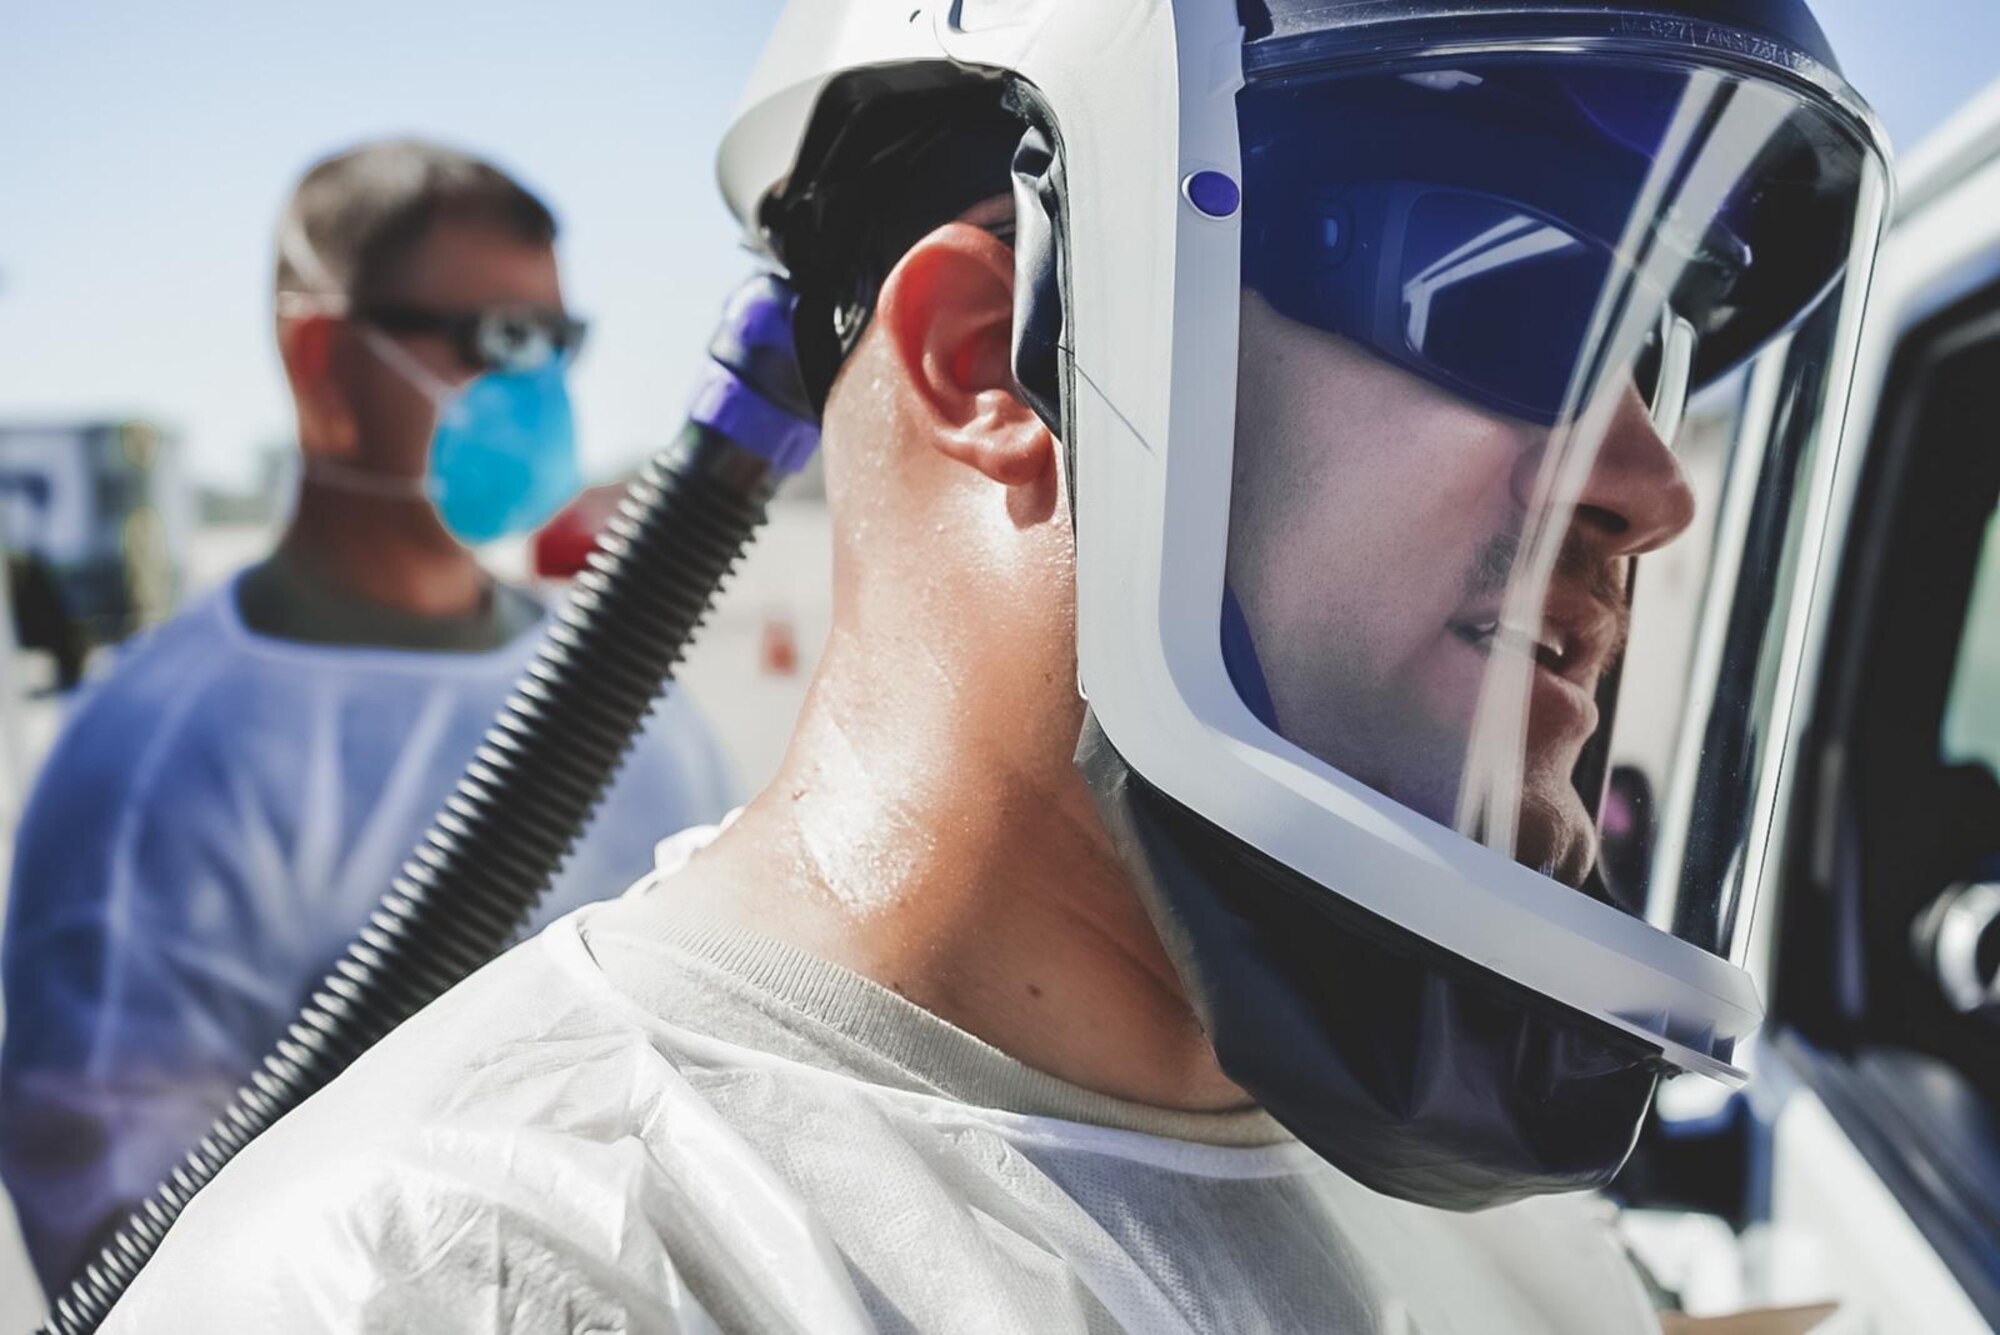 U.S. Air Force Capt. Patrick McGar, 144th Fighter Wing clinical nurse, administers a COVID-19 test at a drive-thru testing site in Indio, Calif. McGar and his medical strike team administered tests from April 1 to May 20, averaging 600 tests per day.